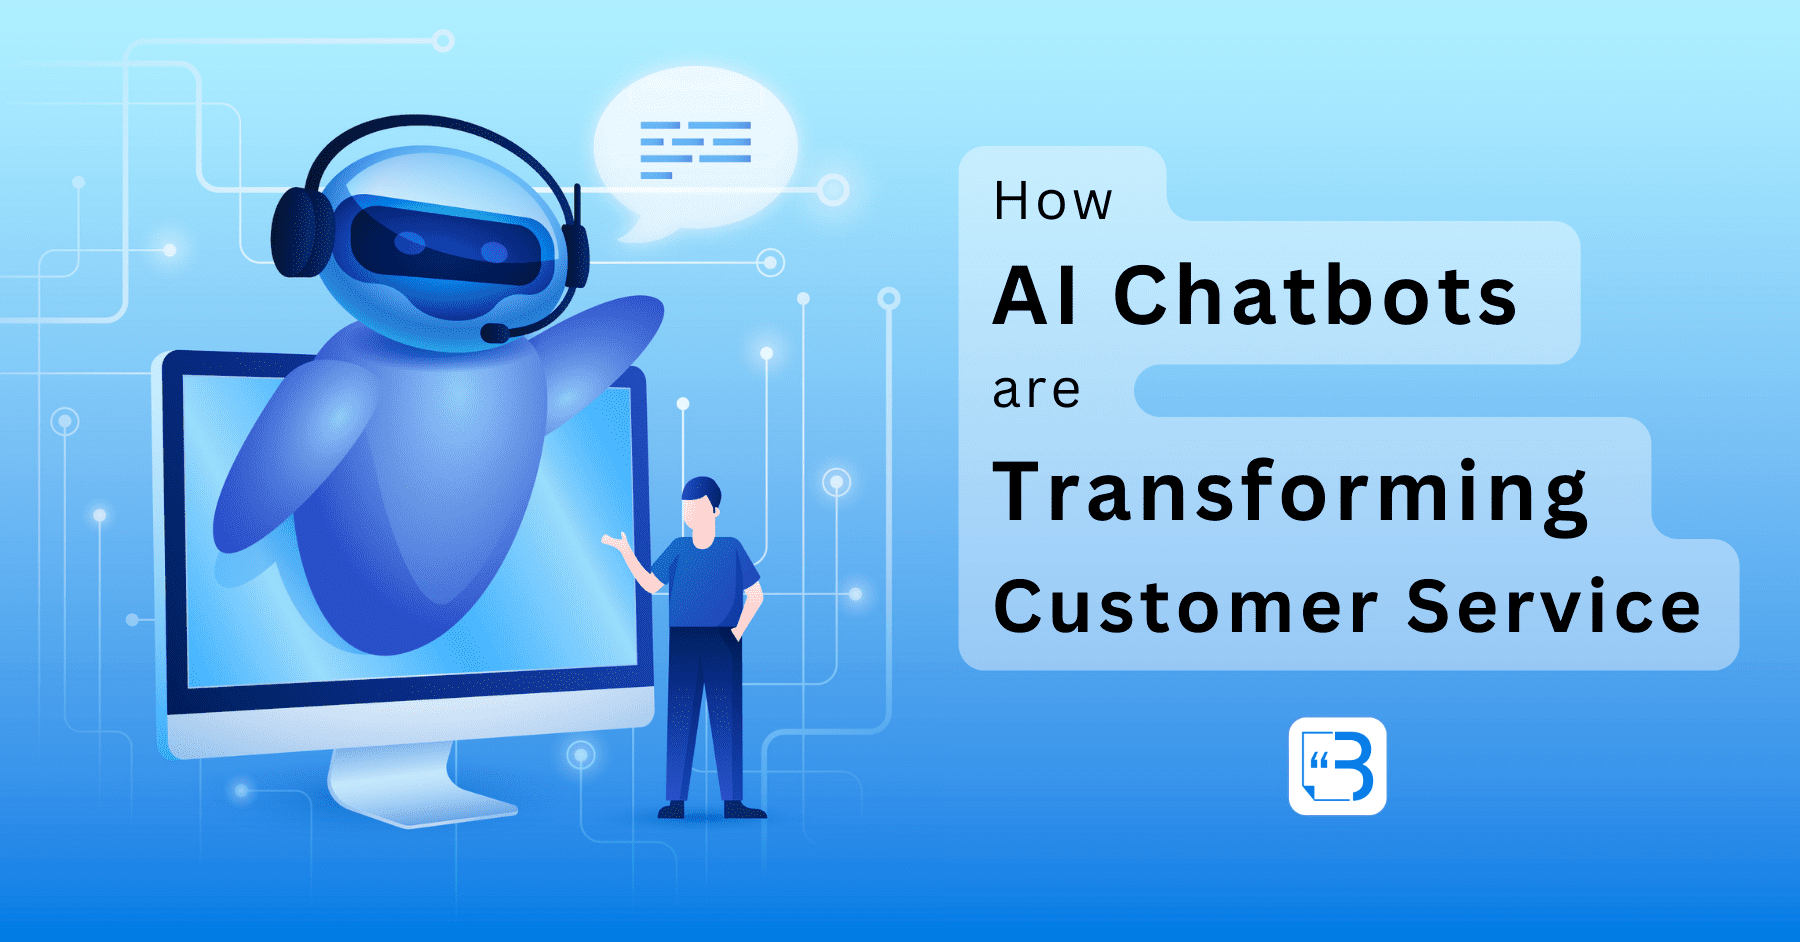 How AI Chatbots are Transforming Customer Service